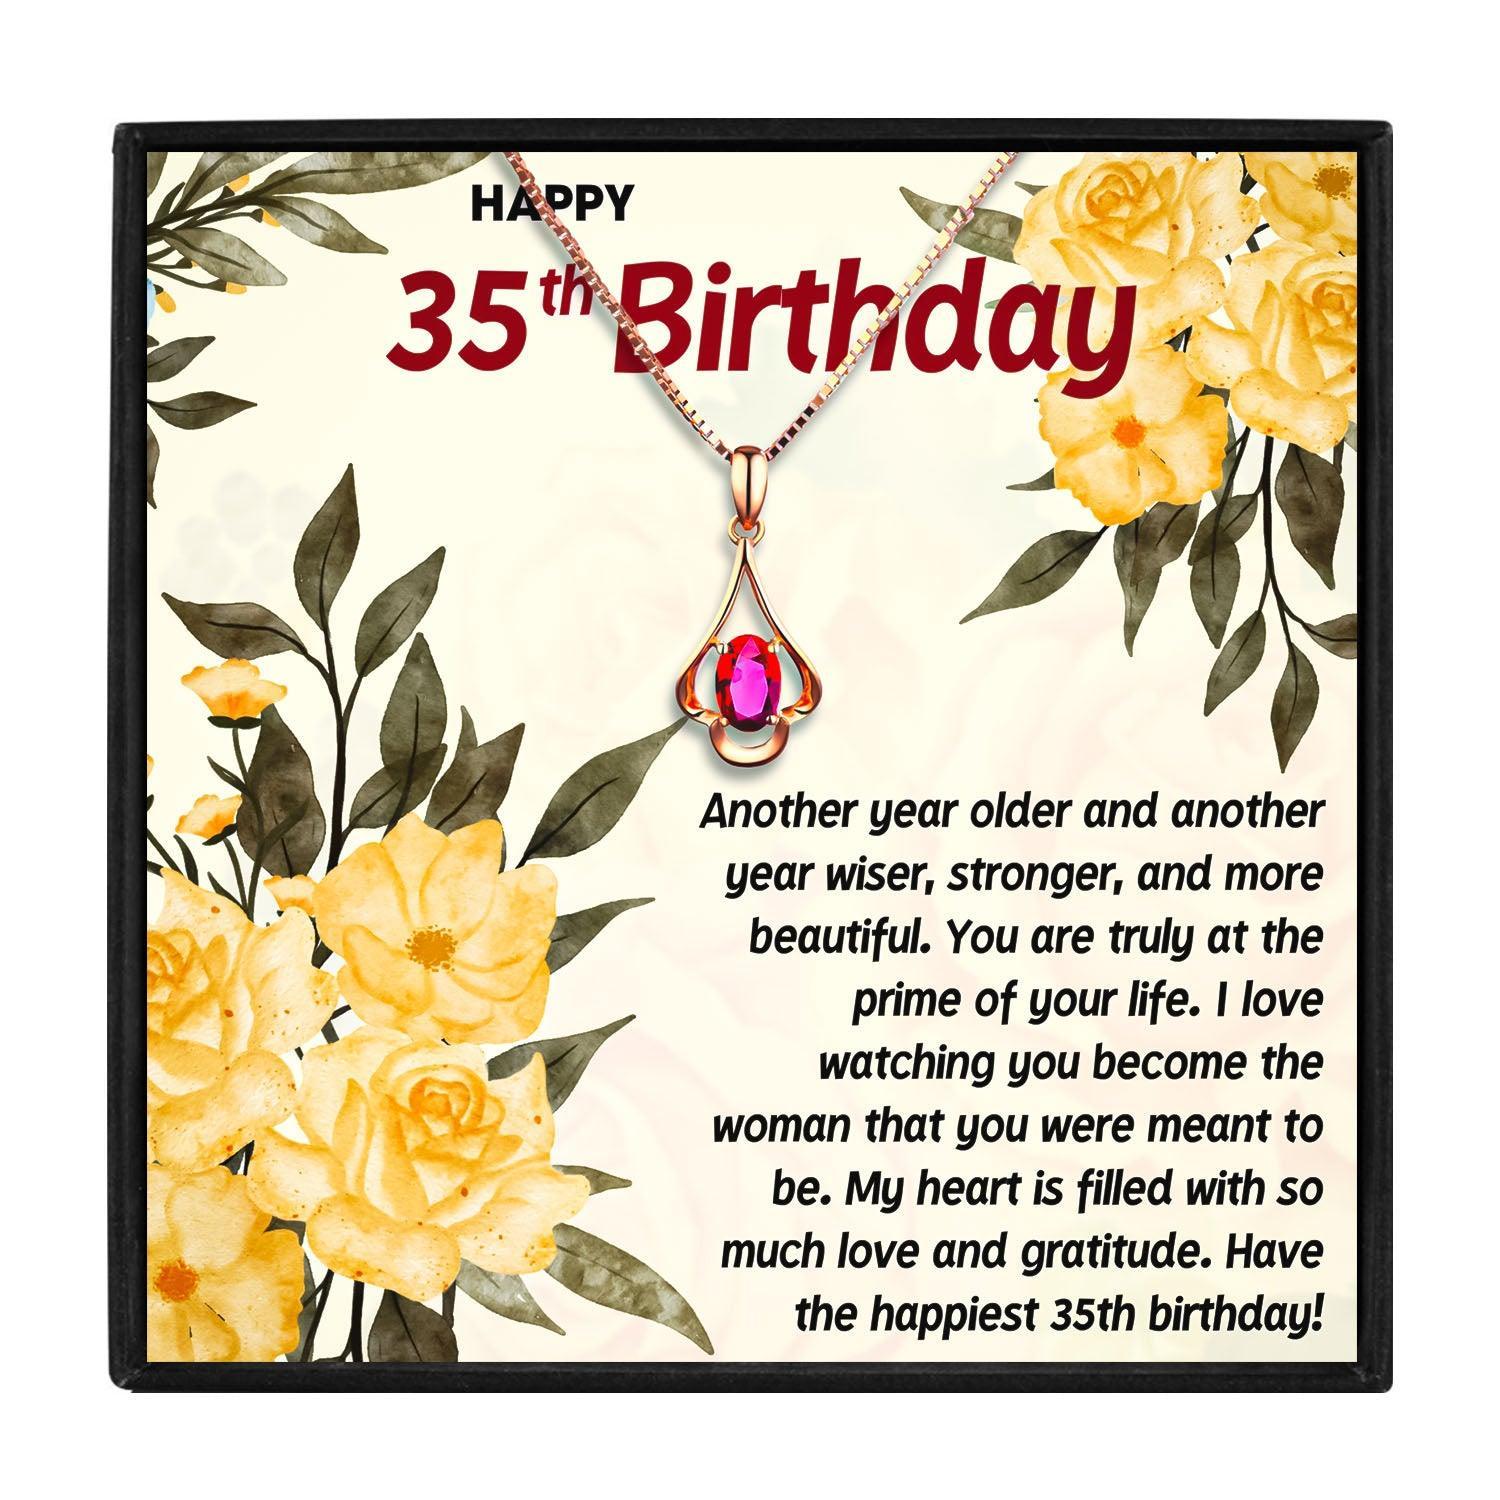 Gift Ideas for a Wife's 35th Birthday for Christmas 2023 | Gift Ideas for a Wife's 35th Birthday - undefined | 35 birthday gift, 35th birthday ideas for a woman, 35th birthday ideas for her, 35th birthday ideas for wife | From Hunny Life | hunnylife.com